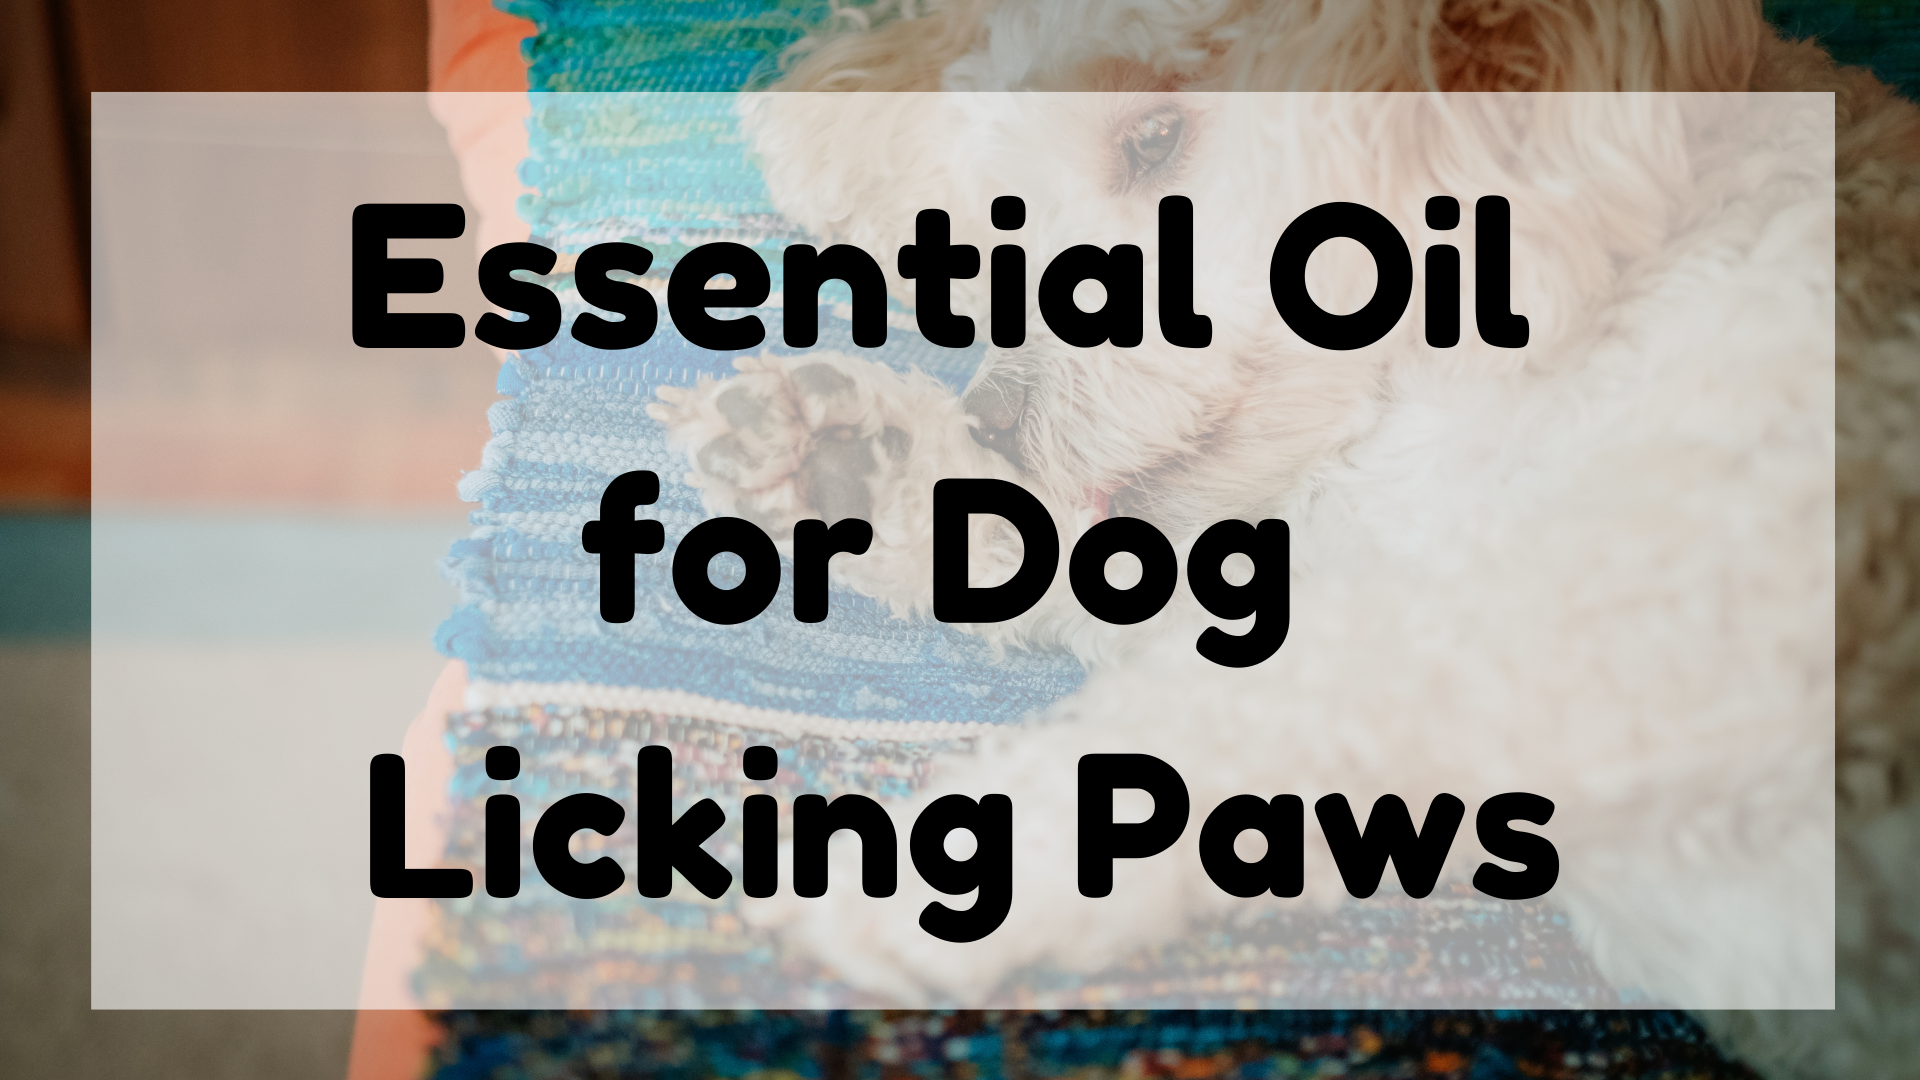 Essential Oil for Dog Licking Paws featured image